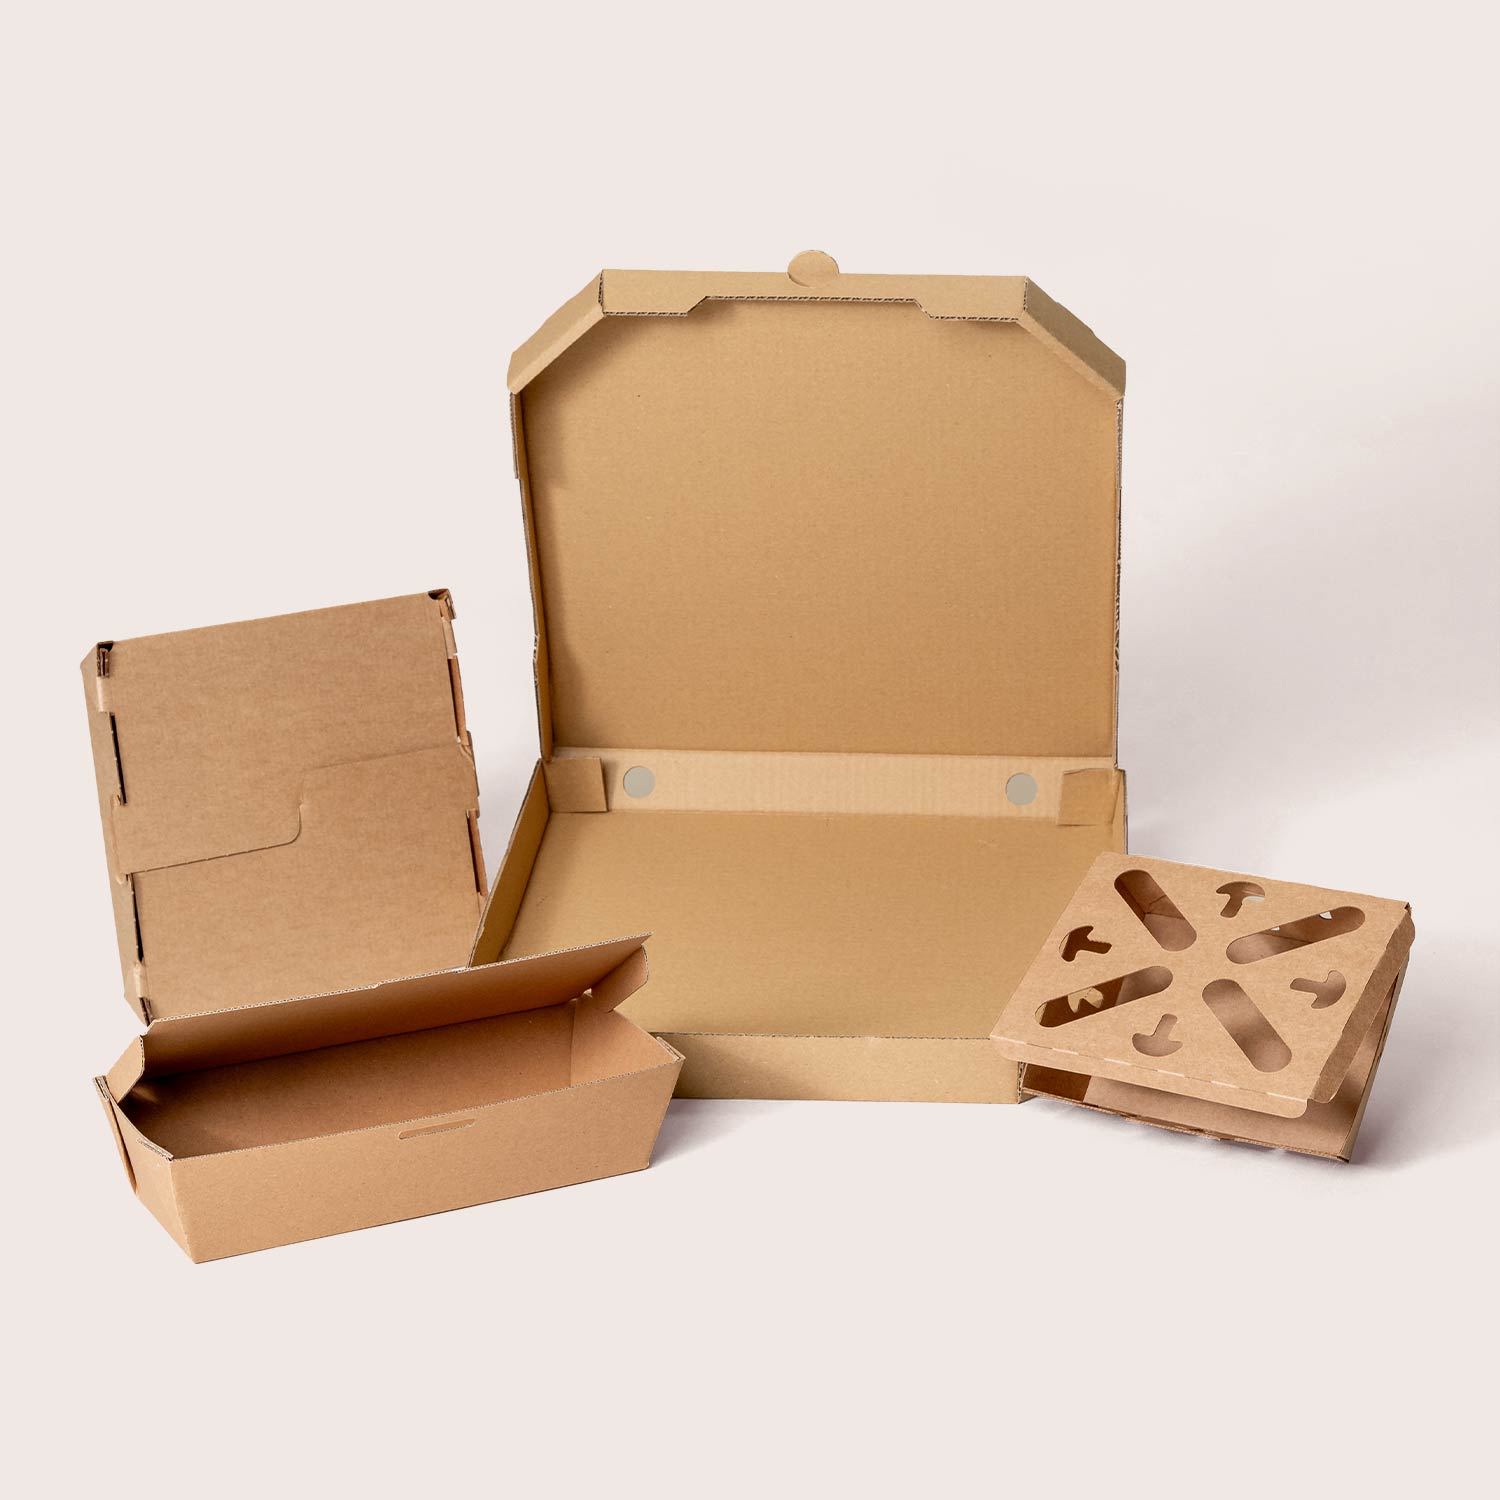 Food packaging from THIMM